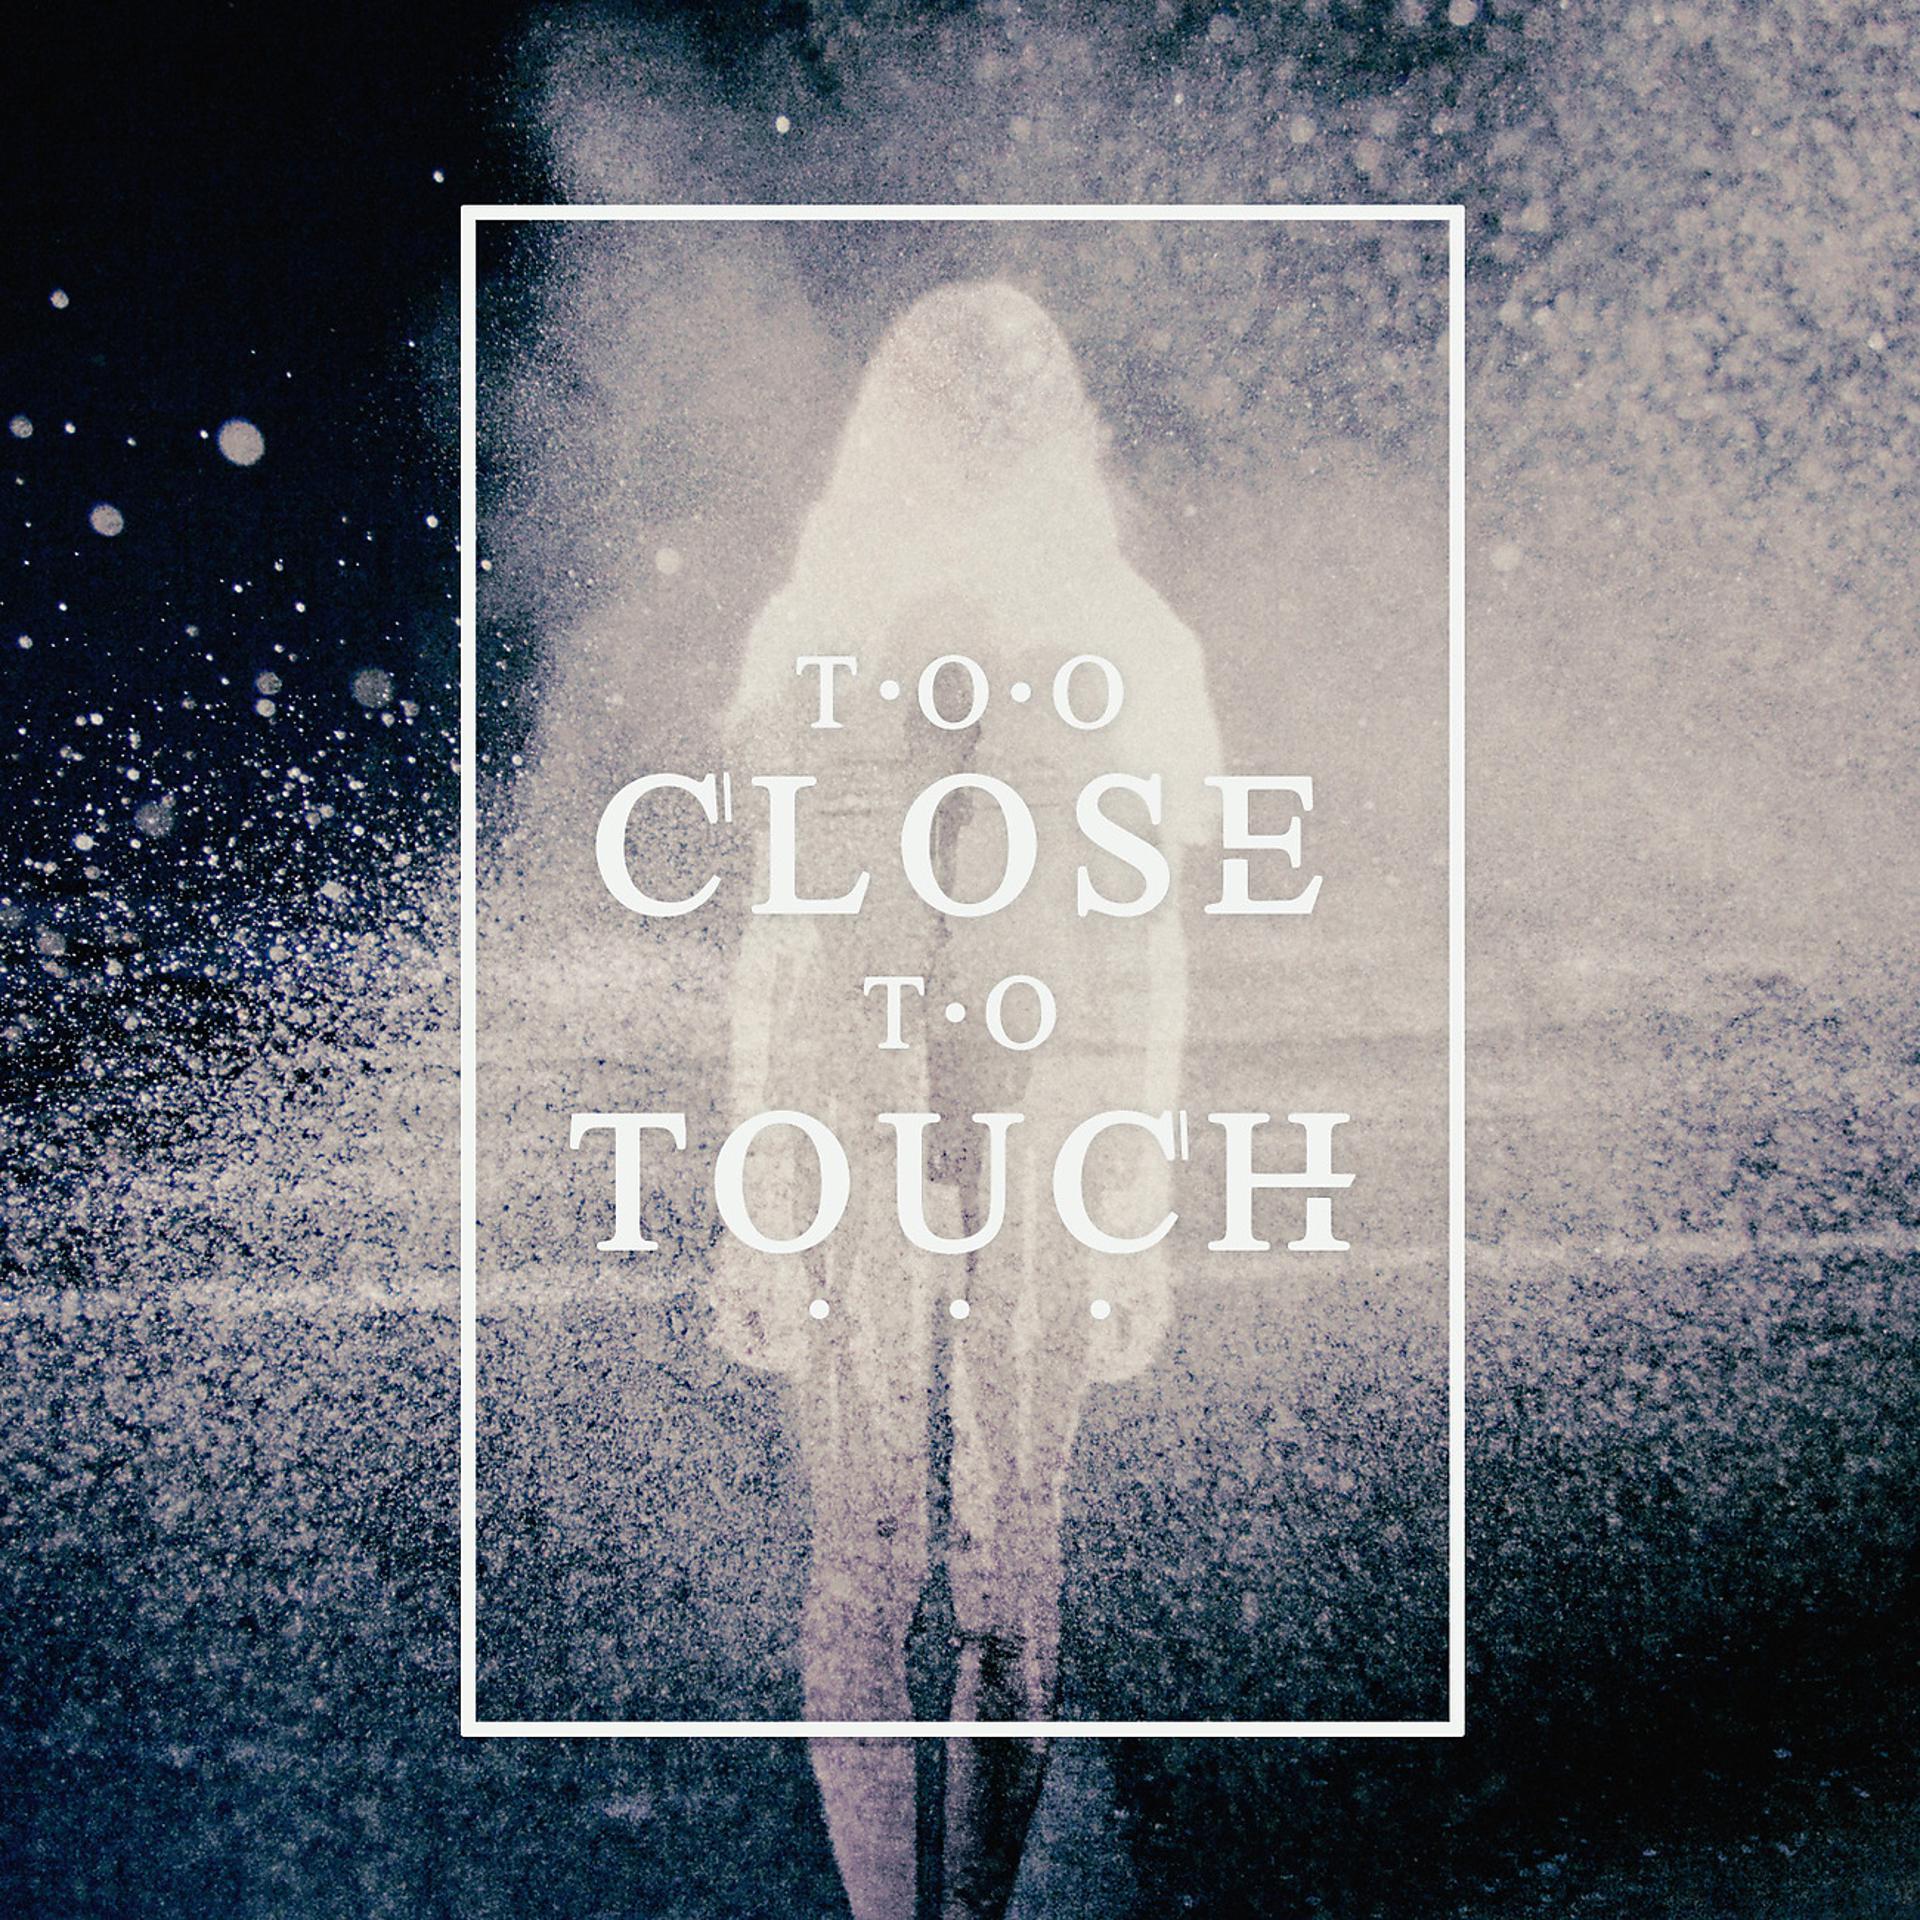 Too close to Touch. Too close to Touch album. Too close to Touch Sympathy. Китон Пирс too close to Touch. I m closer to you